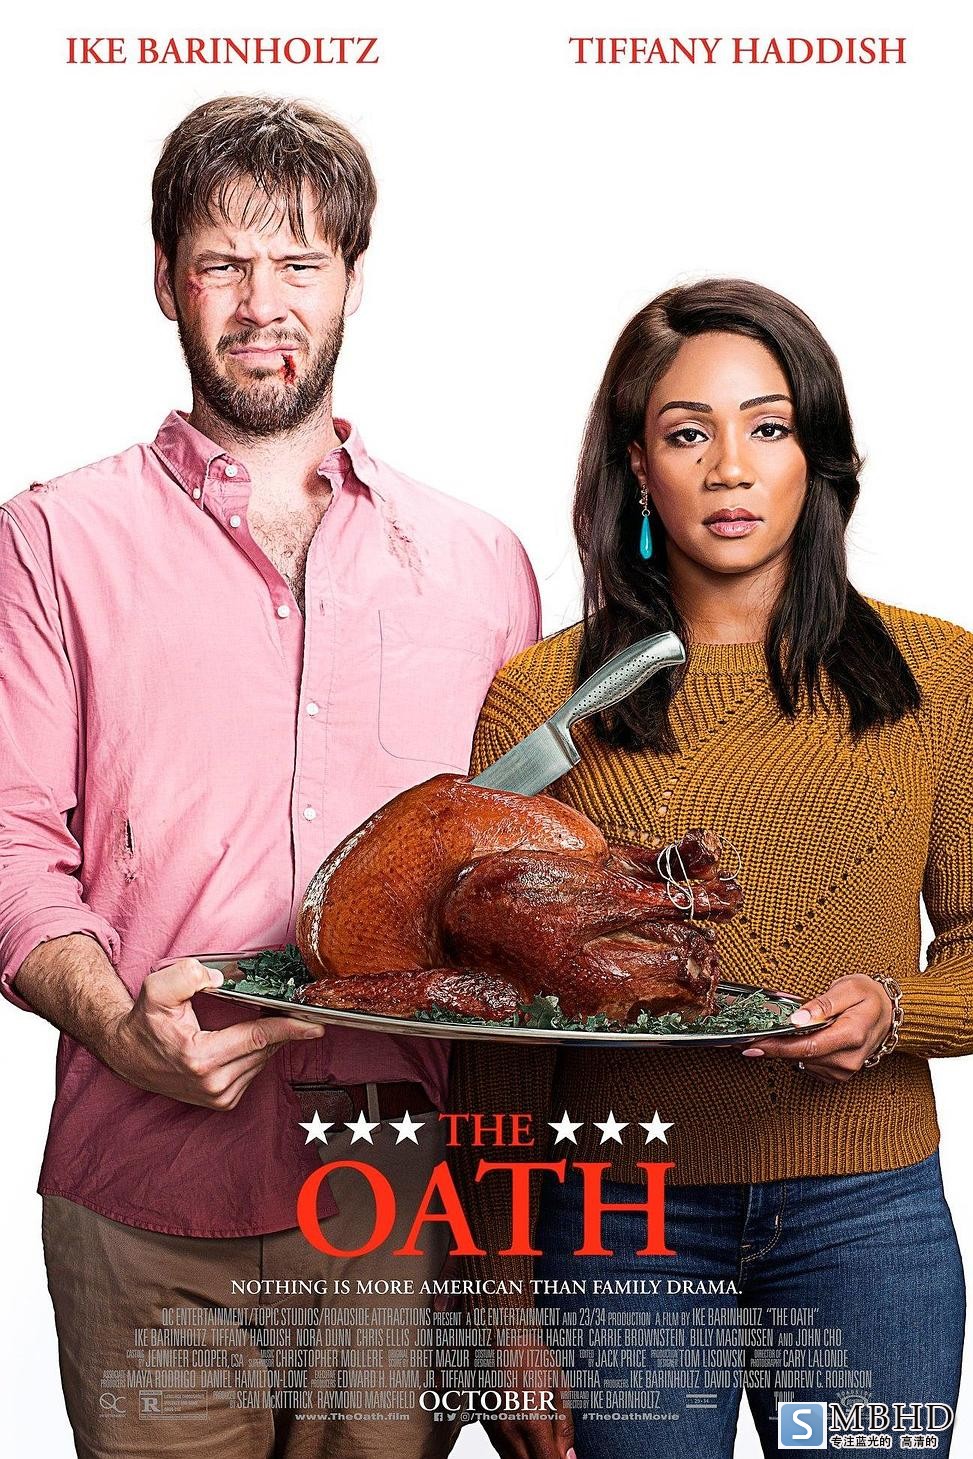 /˶ҪЧͳ The.Oath.2018.1080p.BluRay.REMUX.AVC.DD5.1-FGT 13.37GB-1.png